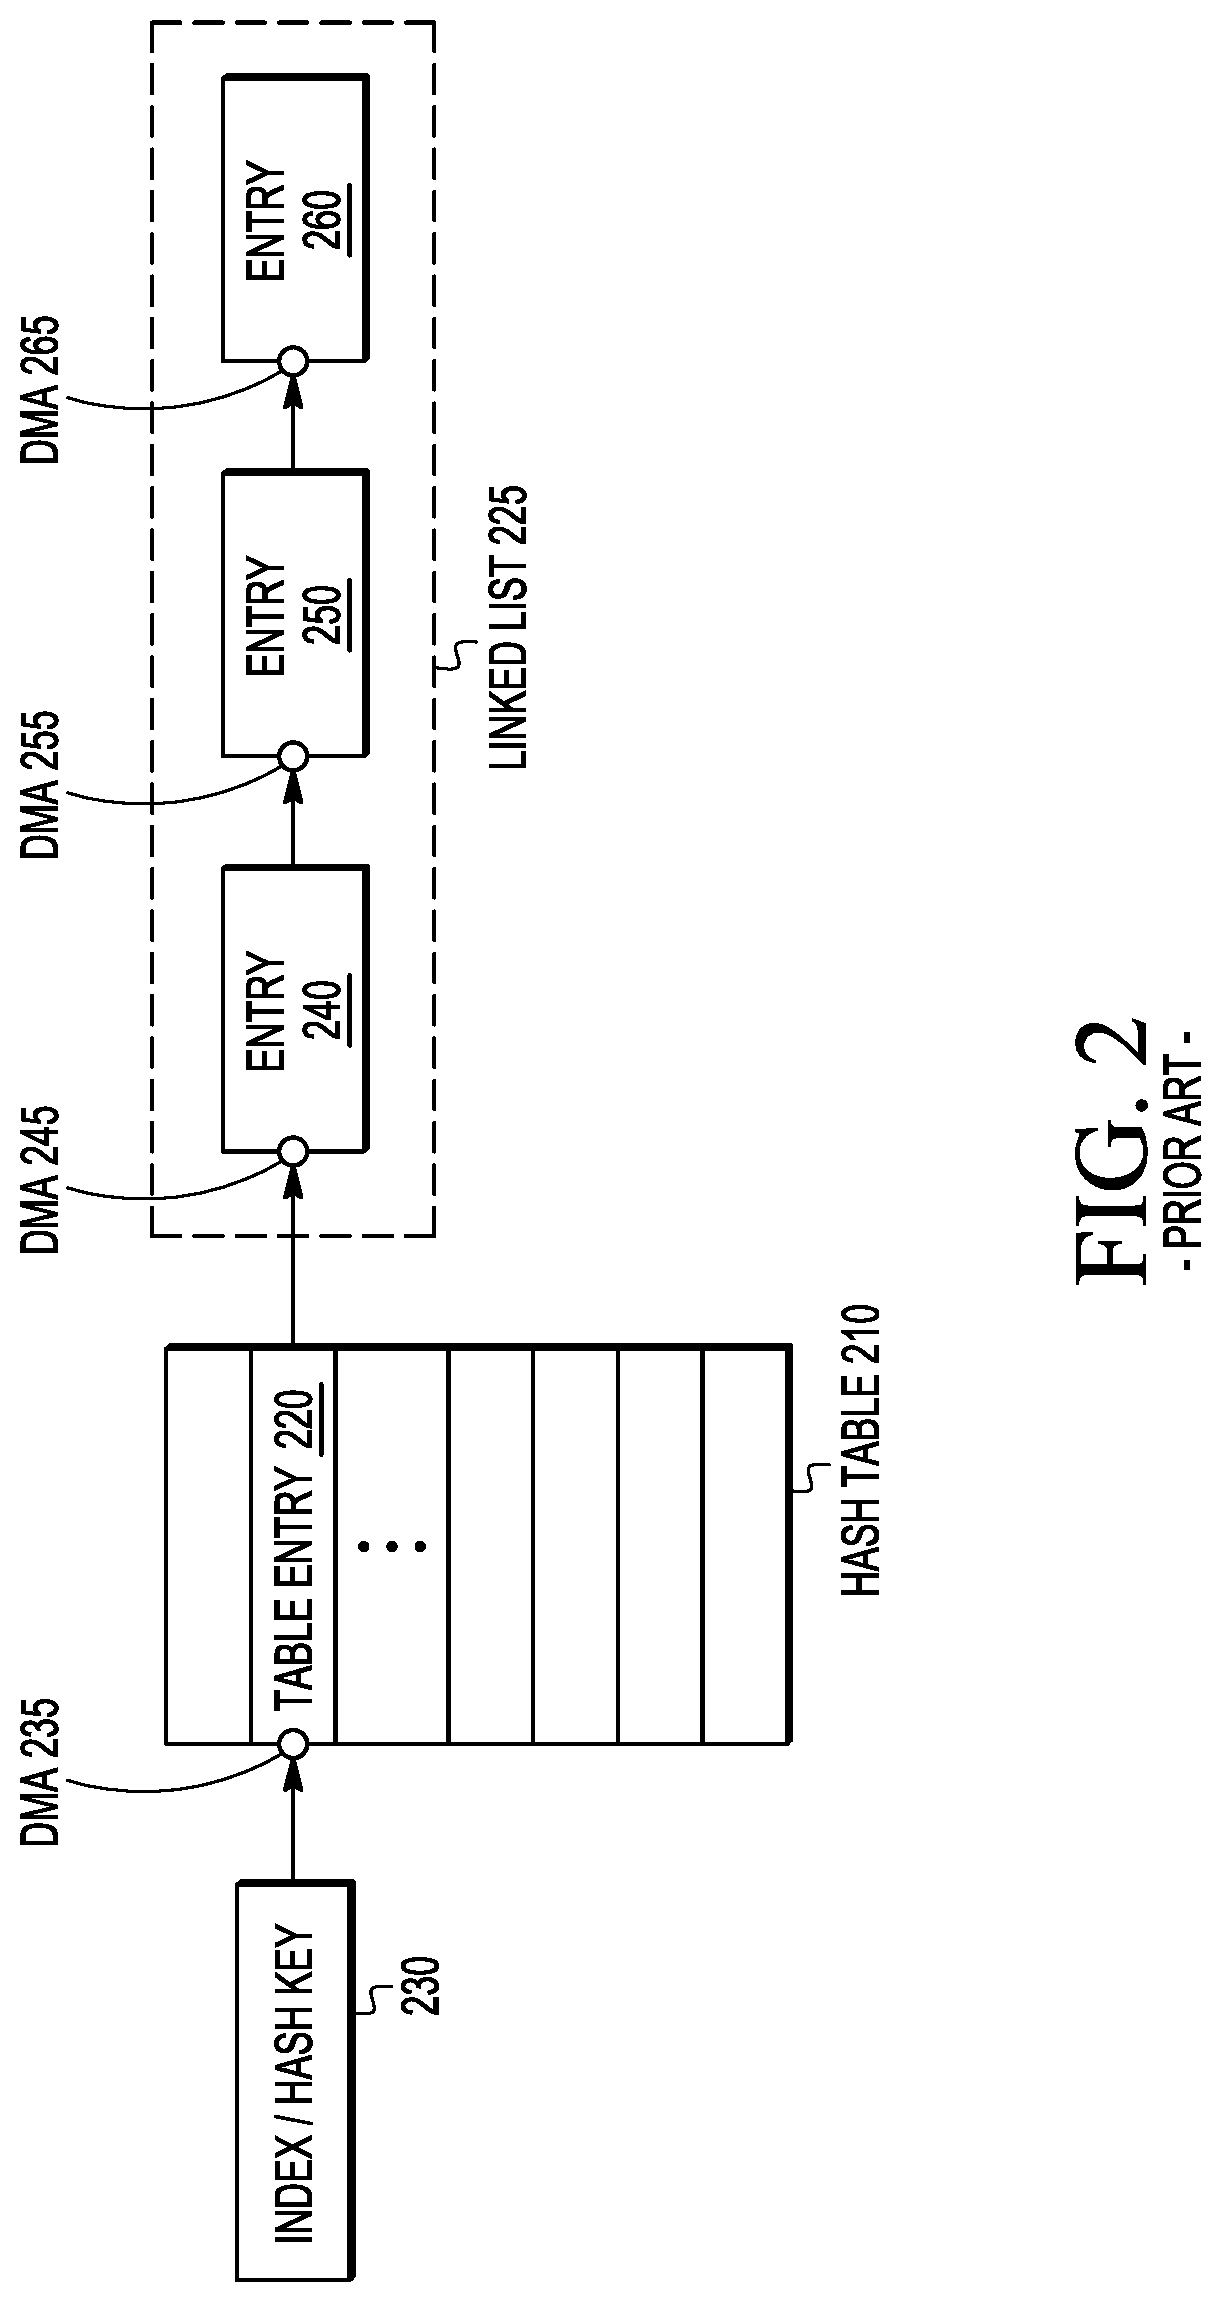 Method and apparatus for improving hash searching throughput in the event of hash collisions